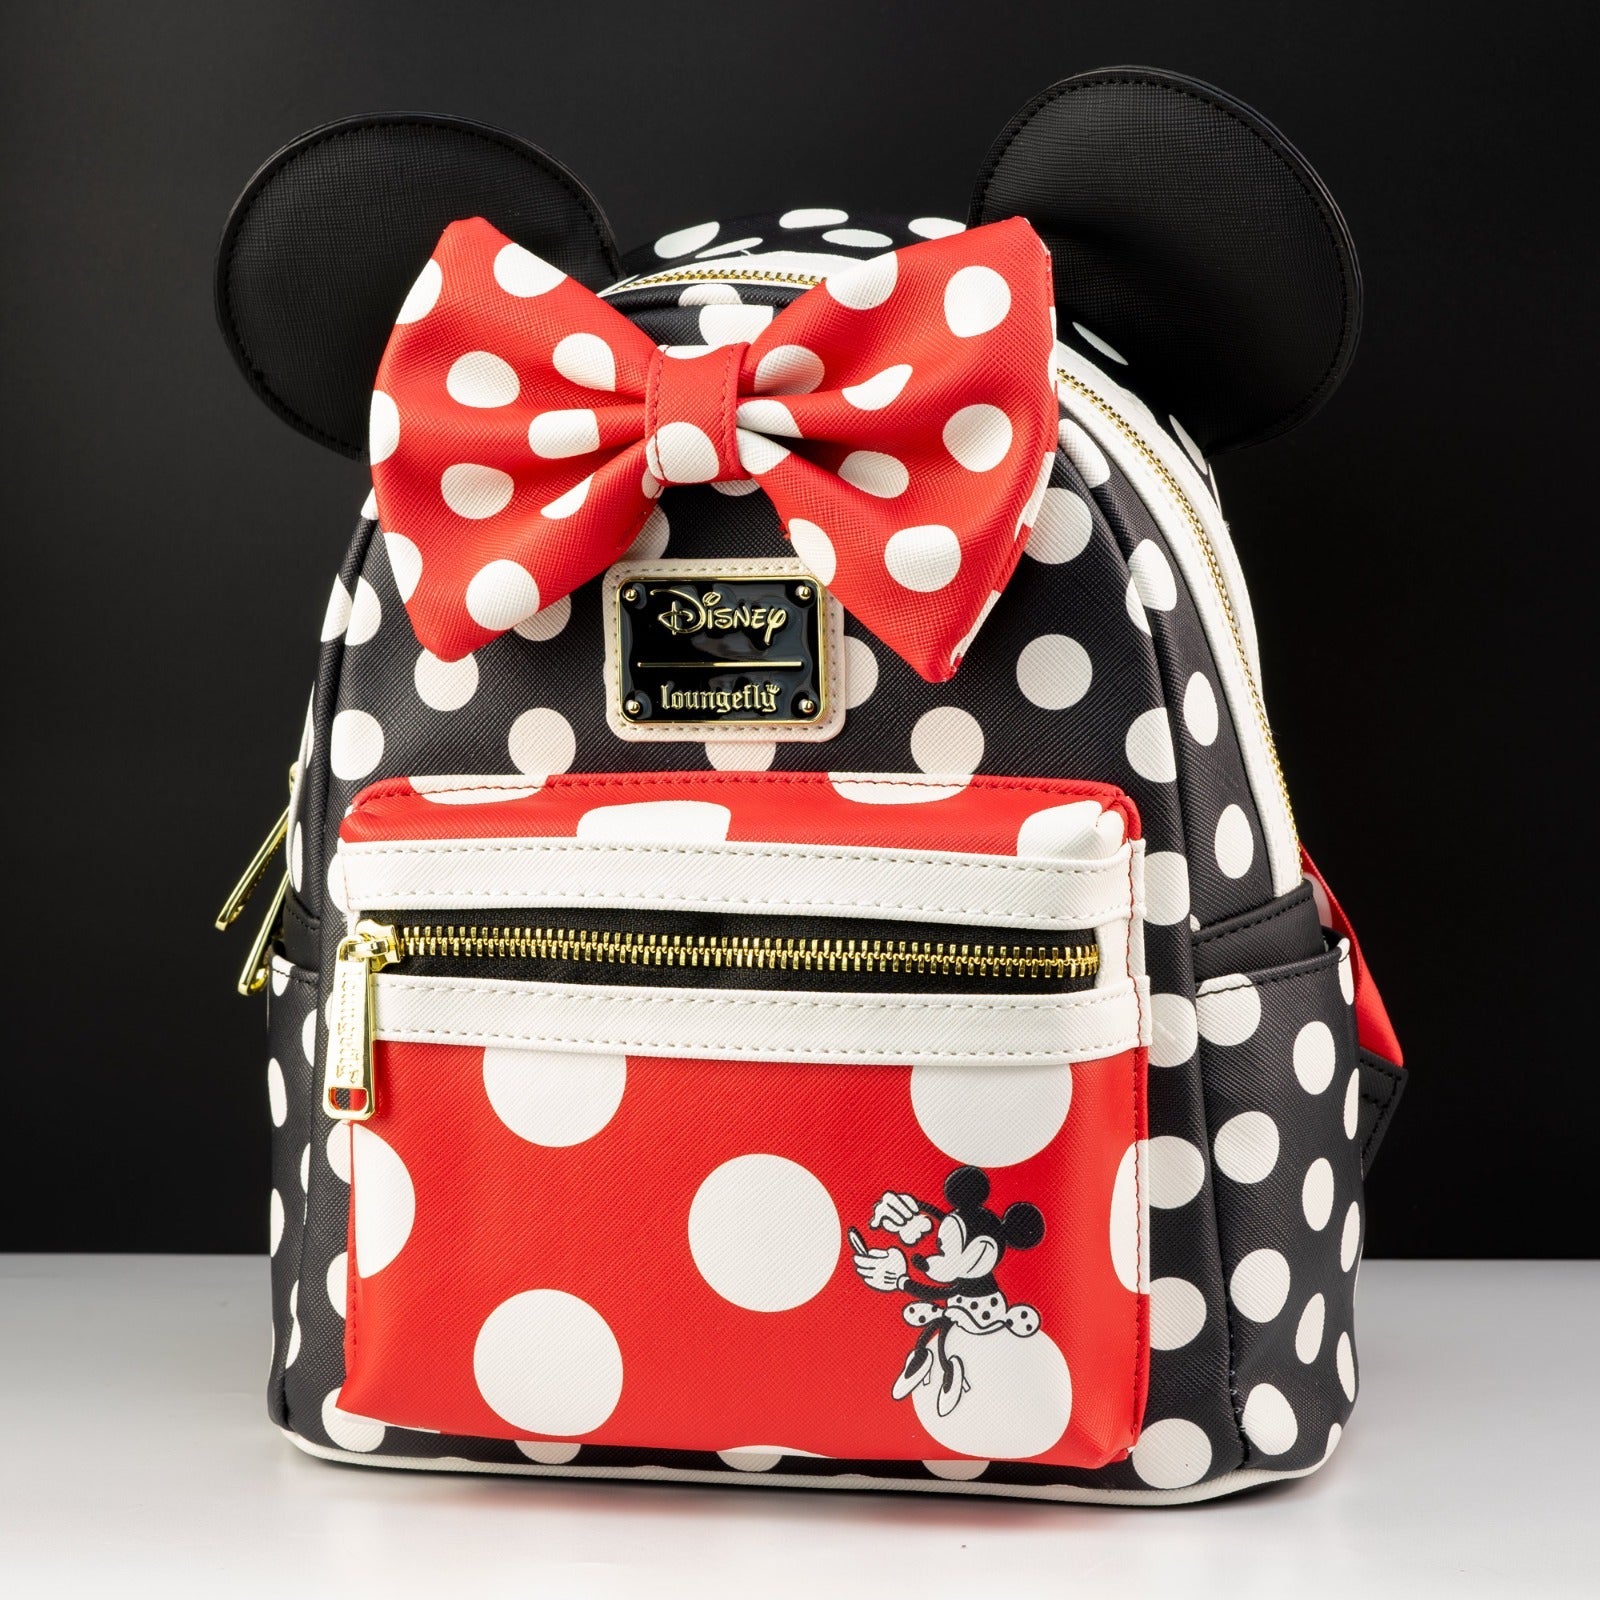 Loungefly X Disney Minnie Mouse Rocks The Dots Mini Backpack - GeekCore